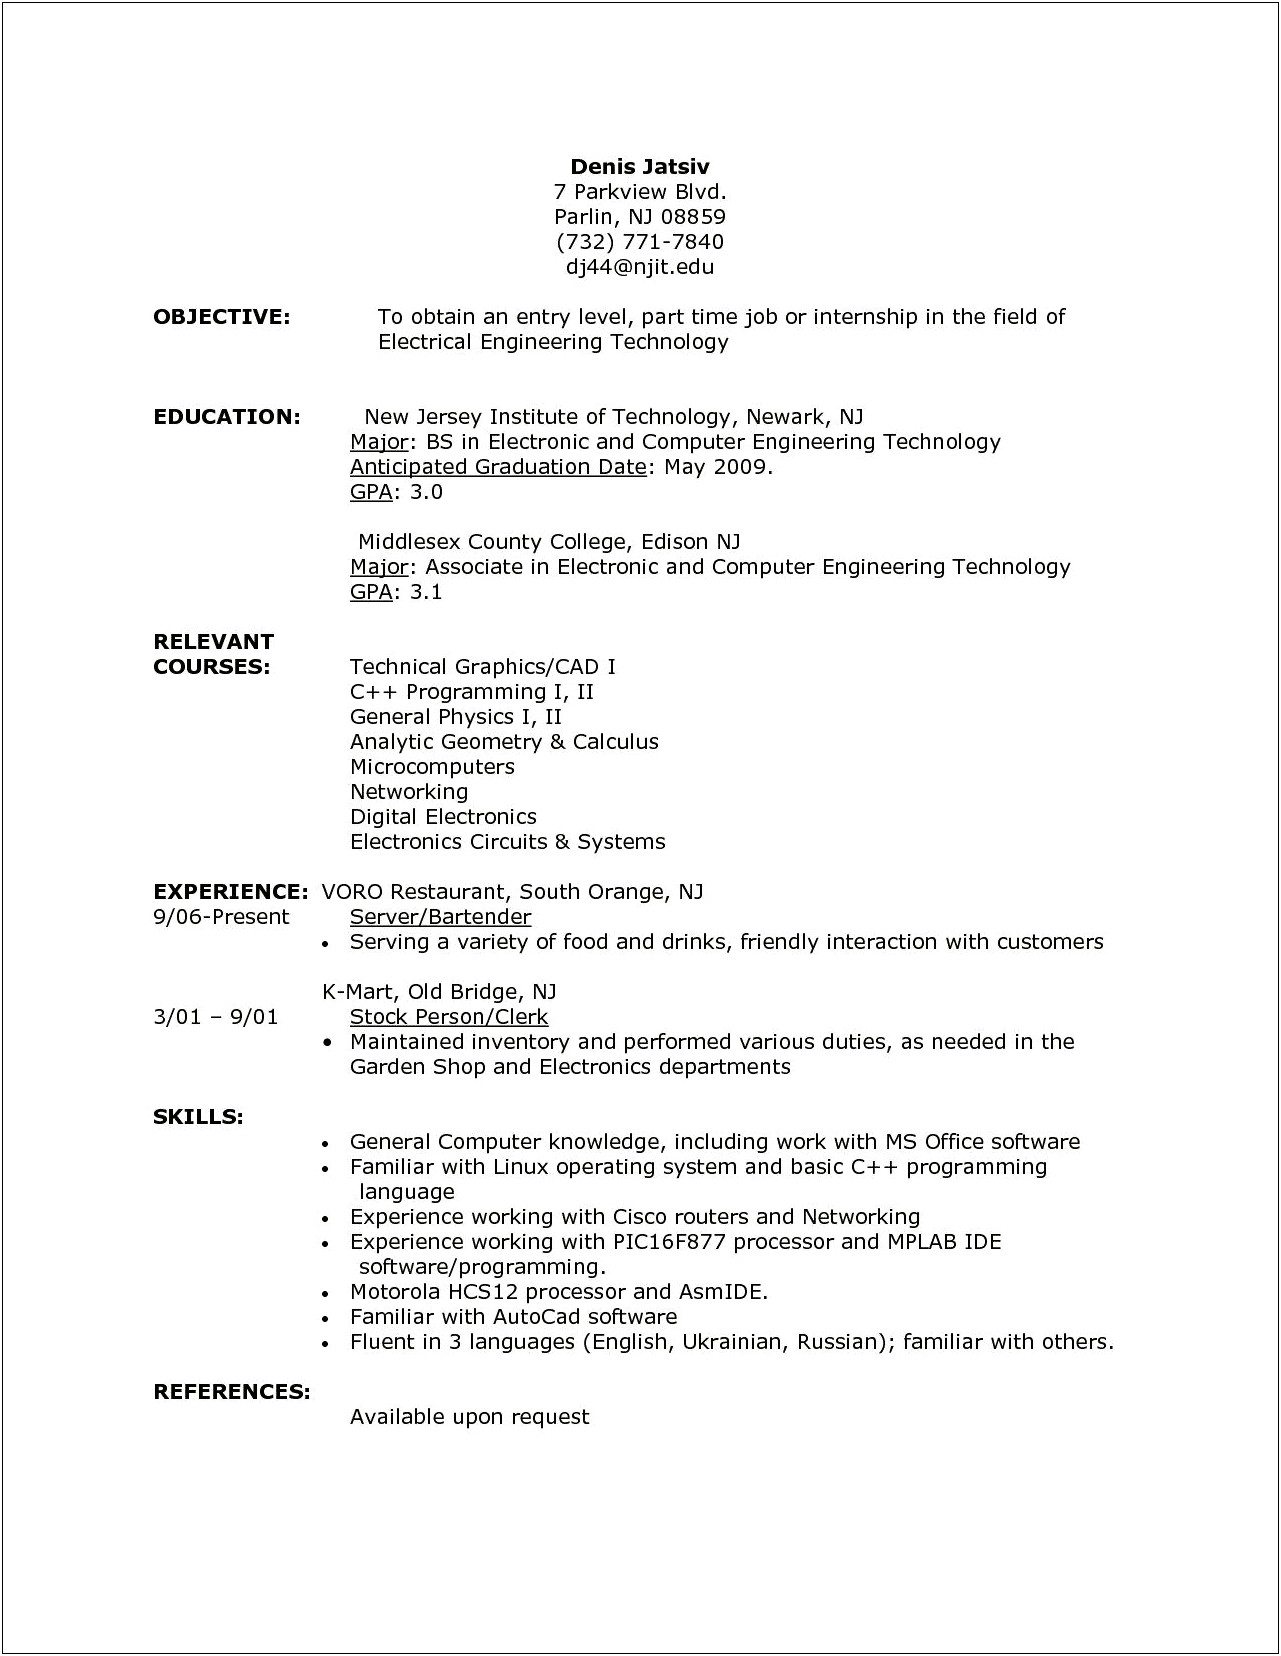 Resume Part Time Job Experience